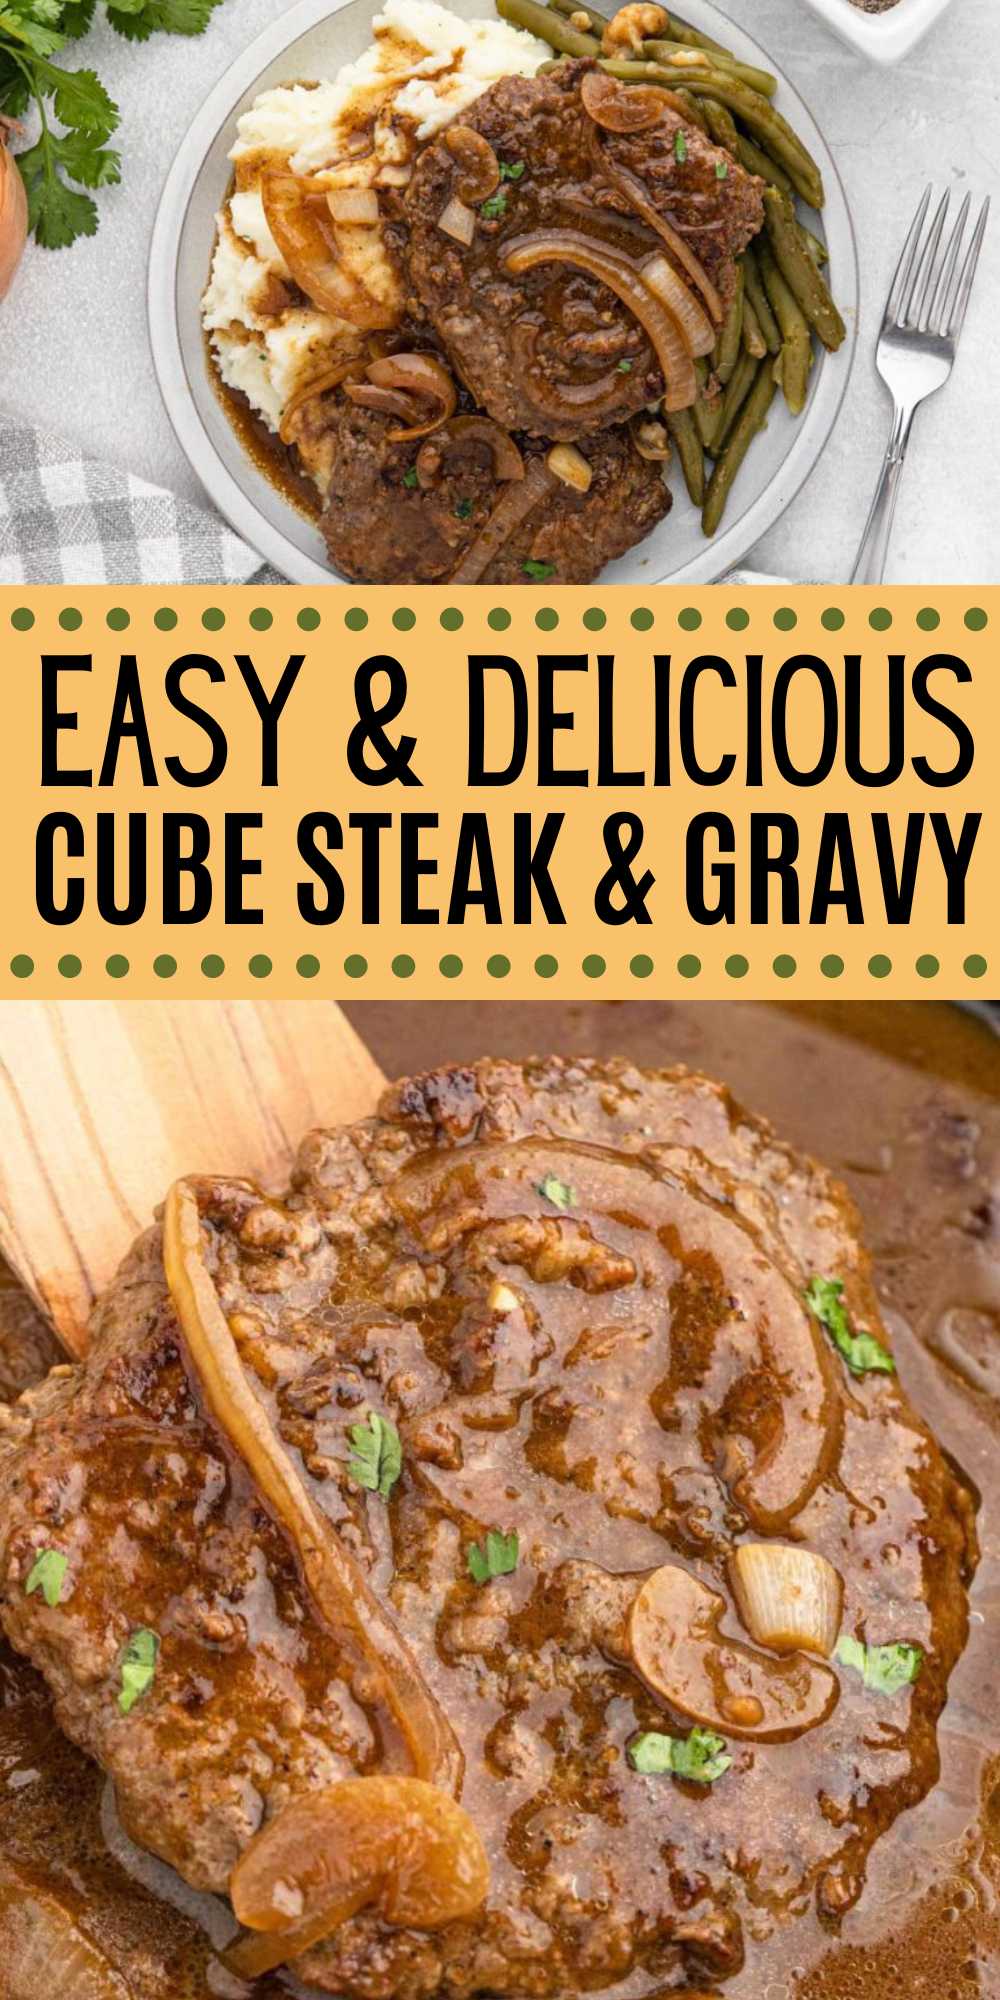 If you are looking for a delicious, comfort food meal make Cube Steak and Gravy. It is loaded with flavor and made in a cast iron skillet. If you are looking for an easy weeknight meal, make this tender Cube Steak and Gravy Recipe. #eatingonadime #cubesteakandgravy #cubesteak